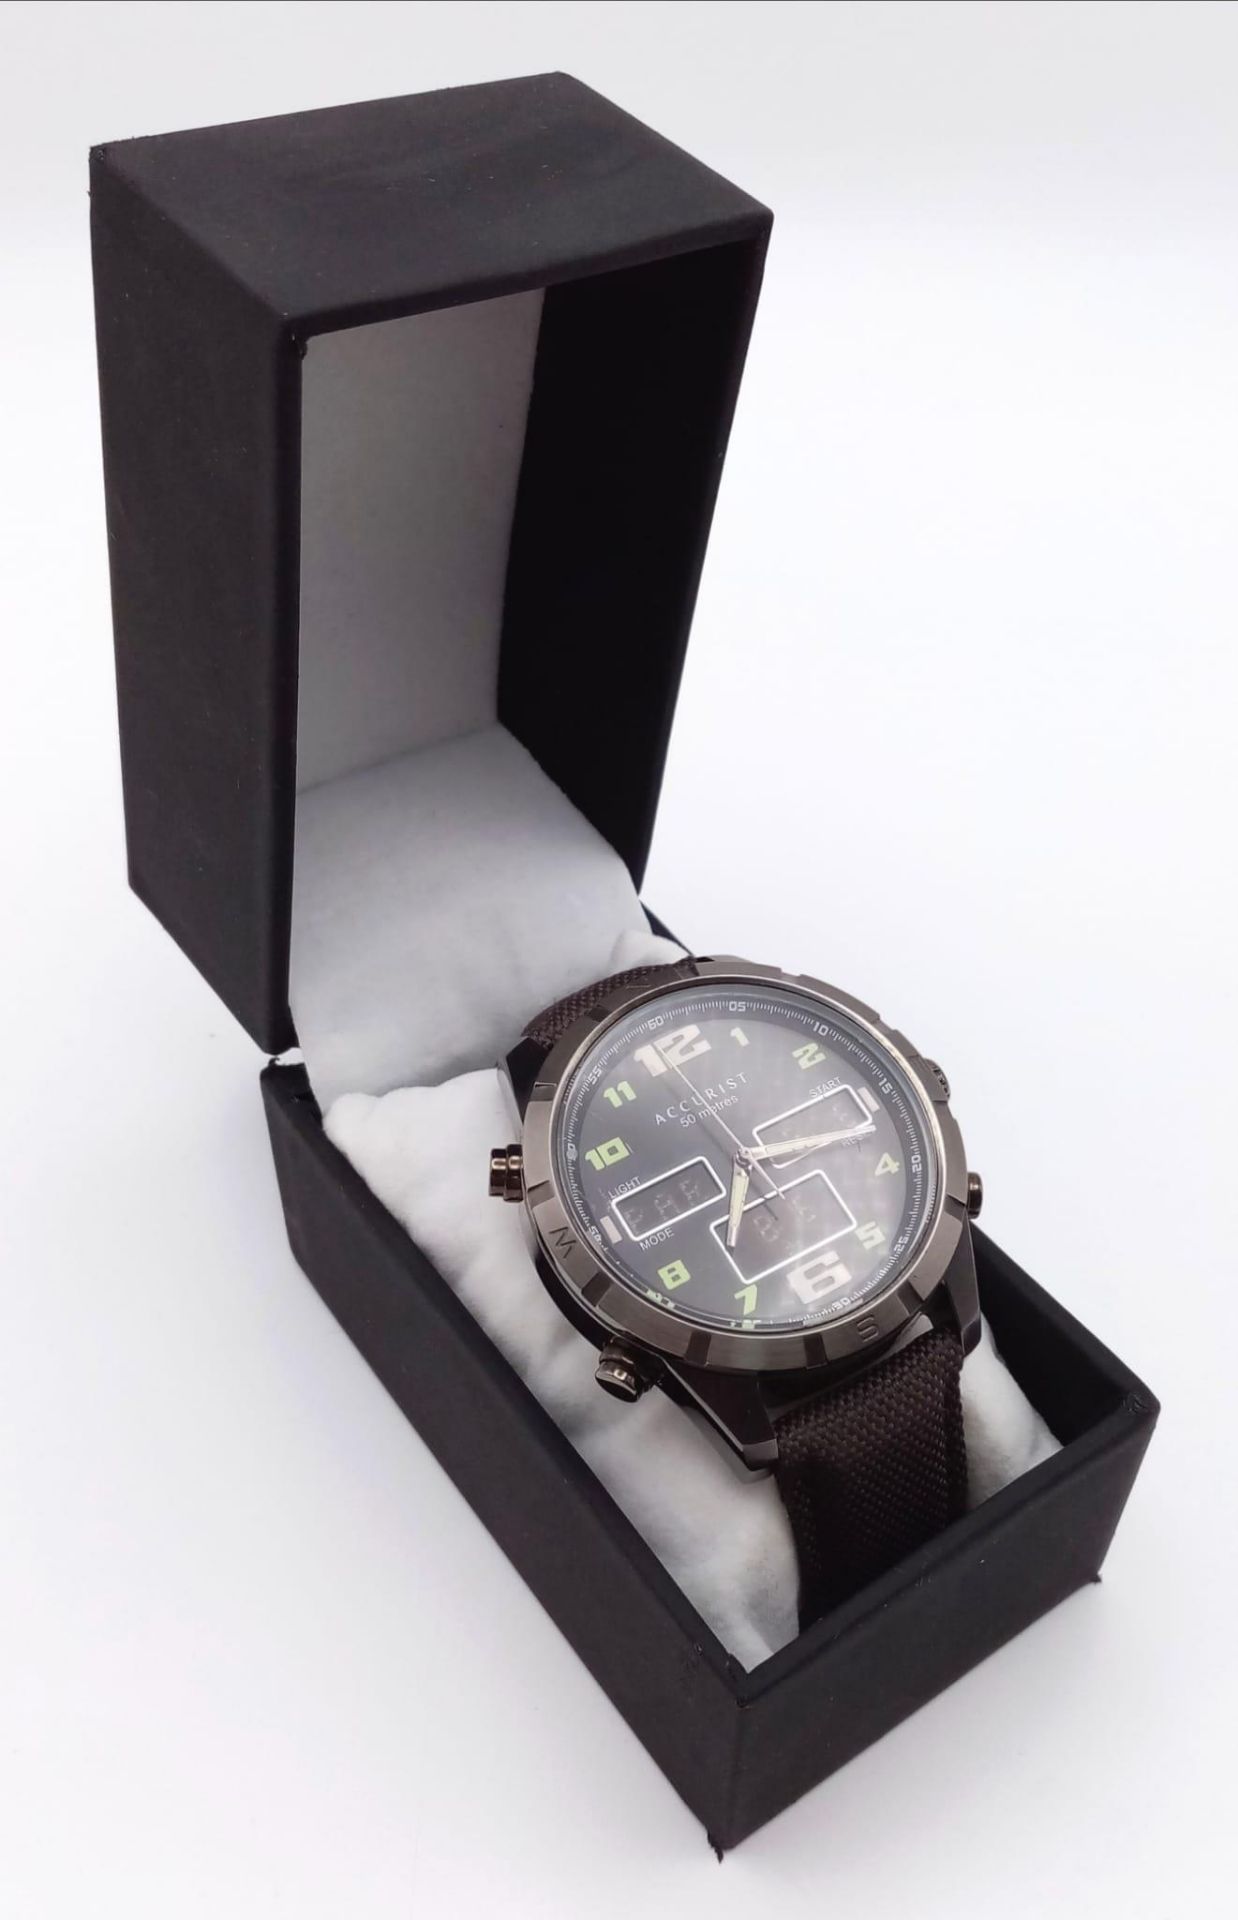 An Excellent Condition Accurist Model 7232 Men’s Digital and Analogue Watch. Bronze Tone. 48mm - Image 7 of 7